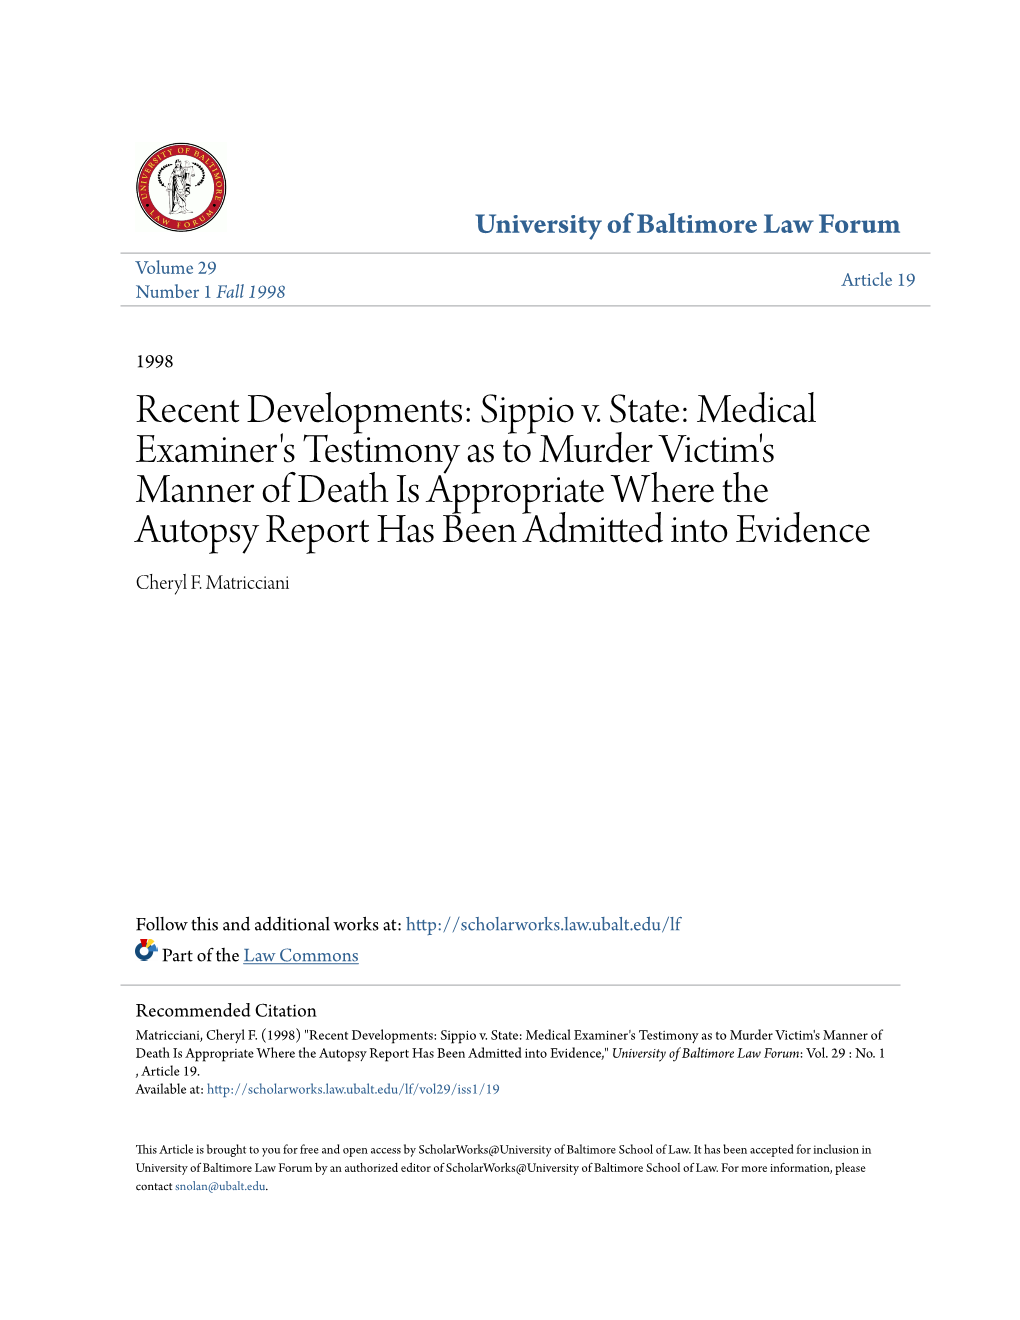 Sippio V. State: Medical Examiner's Testimony As to Murder Victim's Manner of Death Is Appropriate Where the Autopsy Report Has Been Admitted Into Evidence Cheryl F